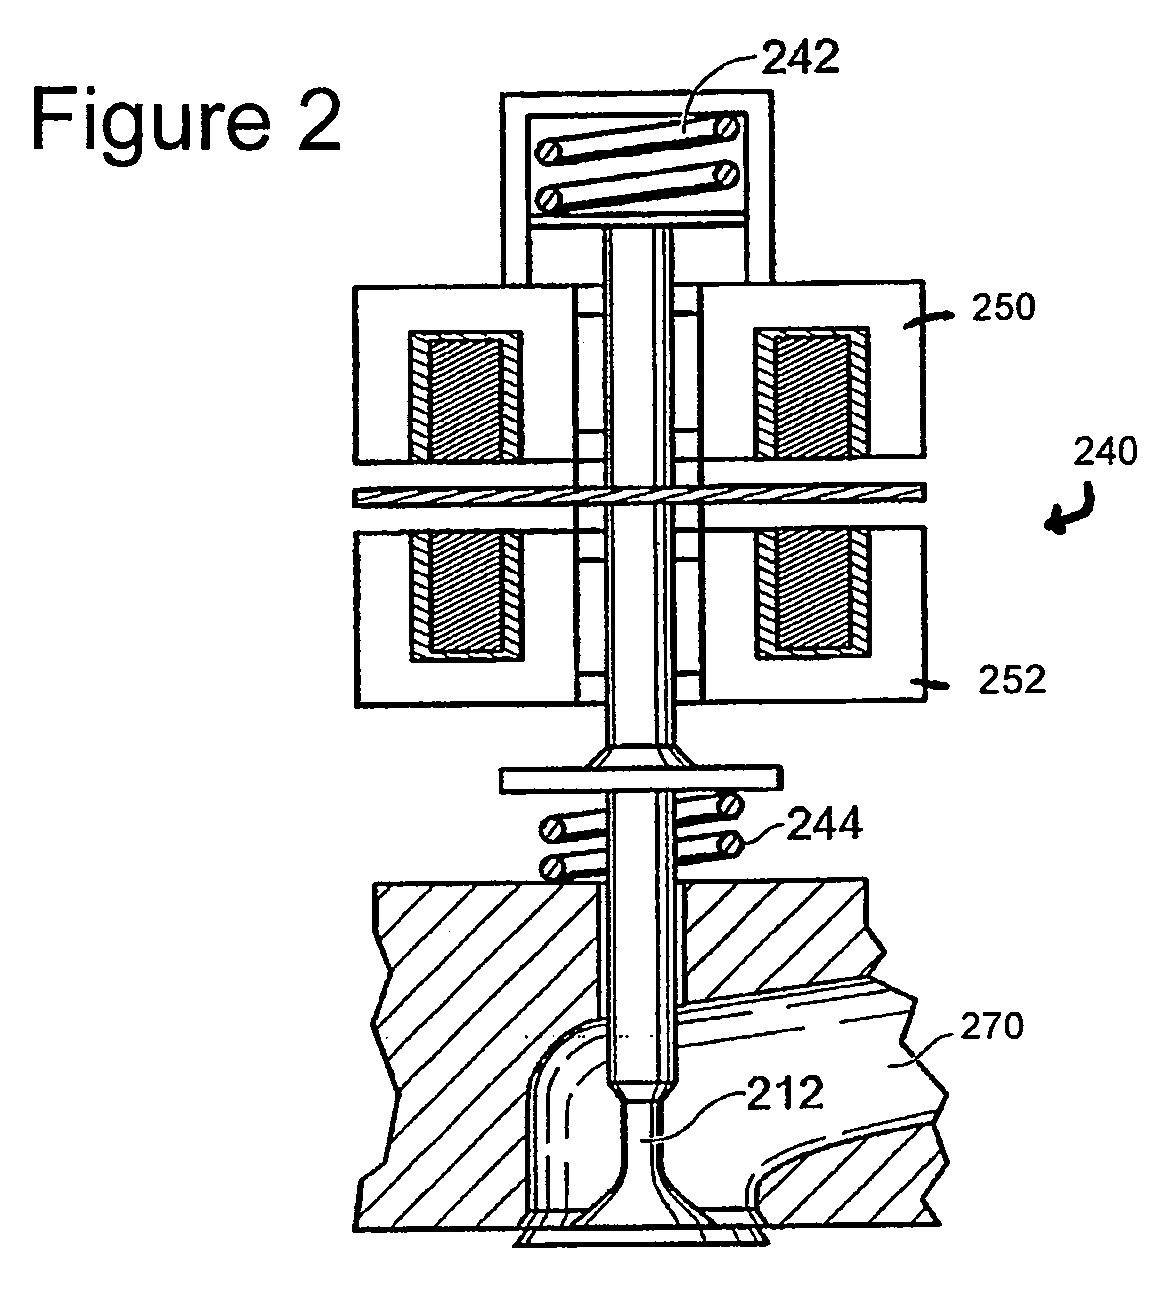 System and method for exhaust heat generation using electrically actuated cylinder valves